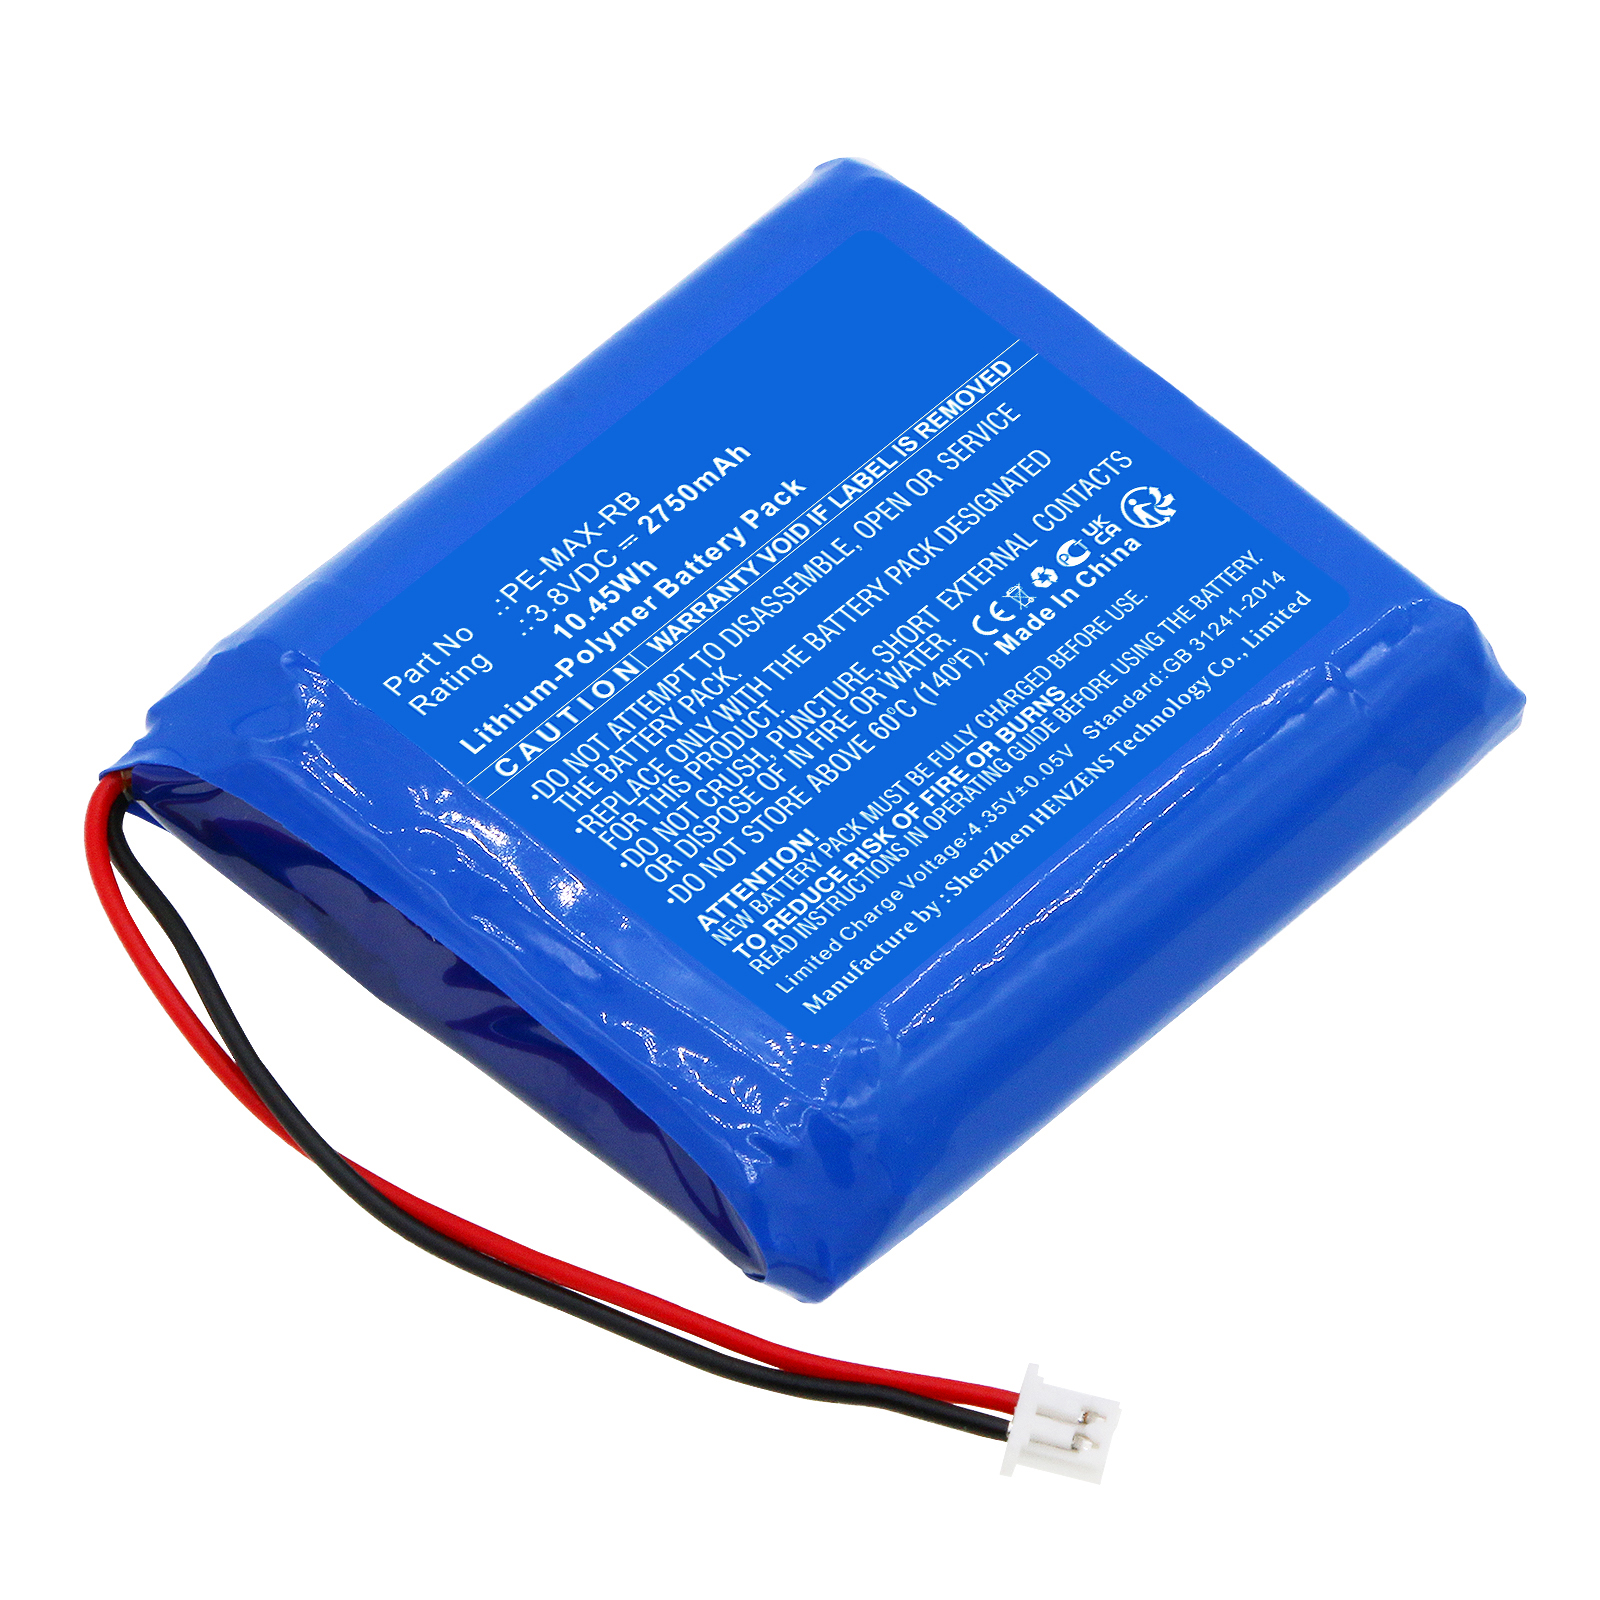 Synergy Digital Camera Battery, Compatible with PatrolEyes PE-MAX-RB Digital Camera Battery (Li-Pol, 3.8V, 2750mAh)